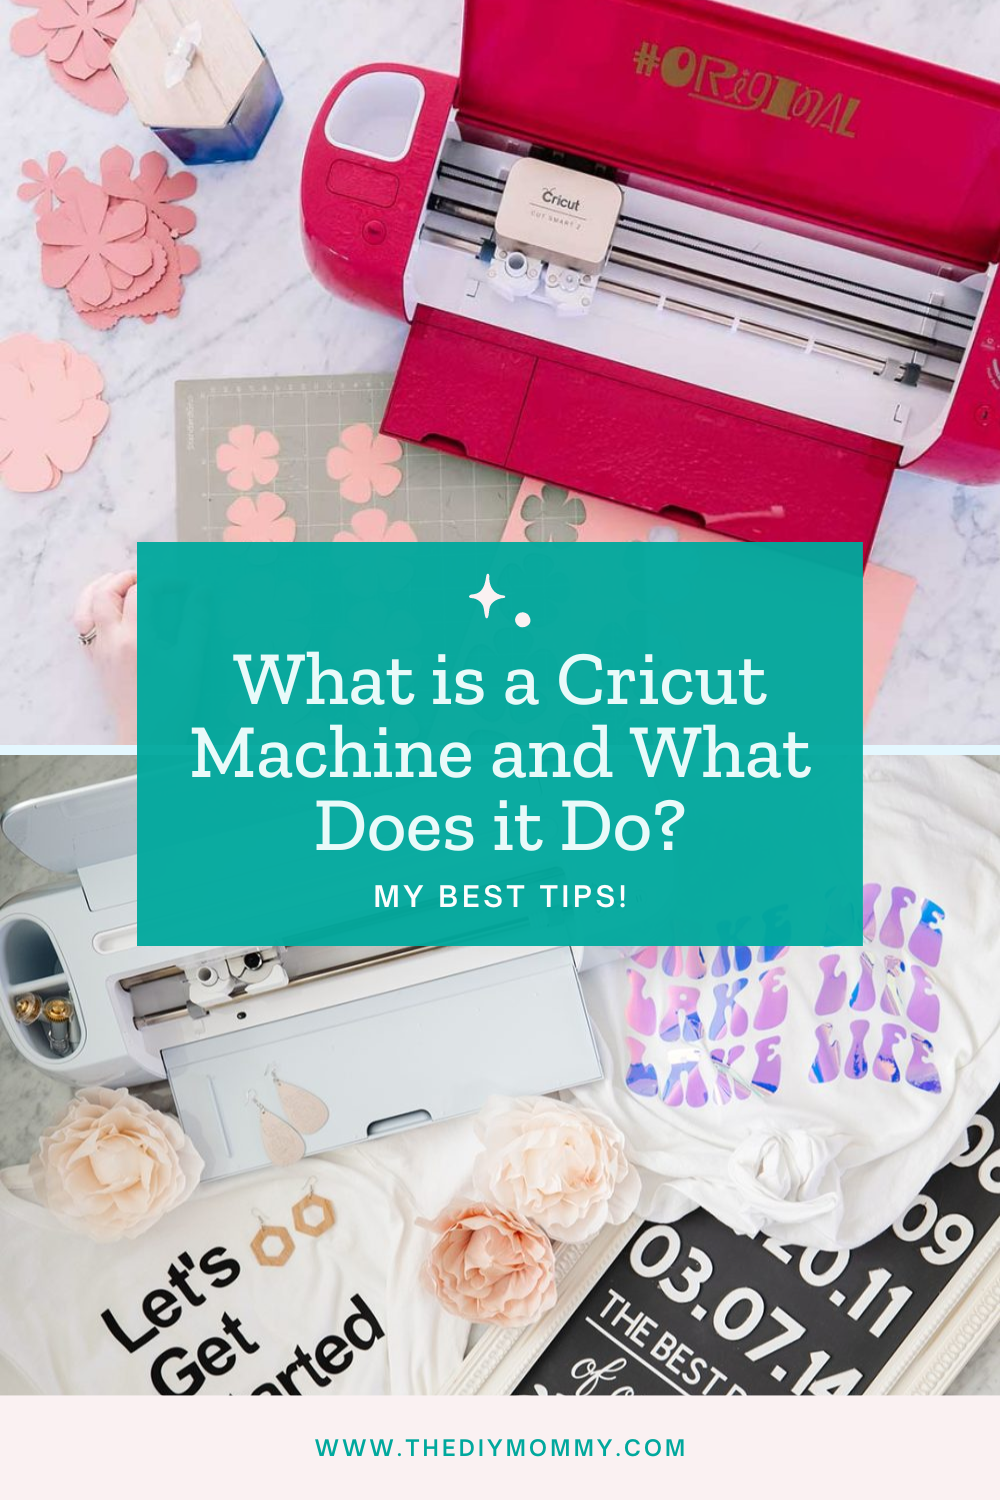 An ultimate guide to the various Cricut machines and what each machine can do.